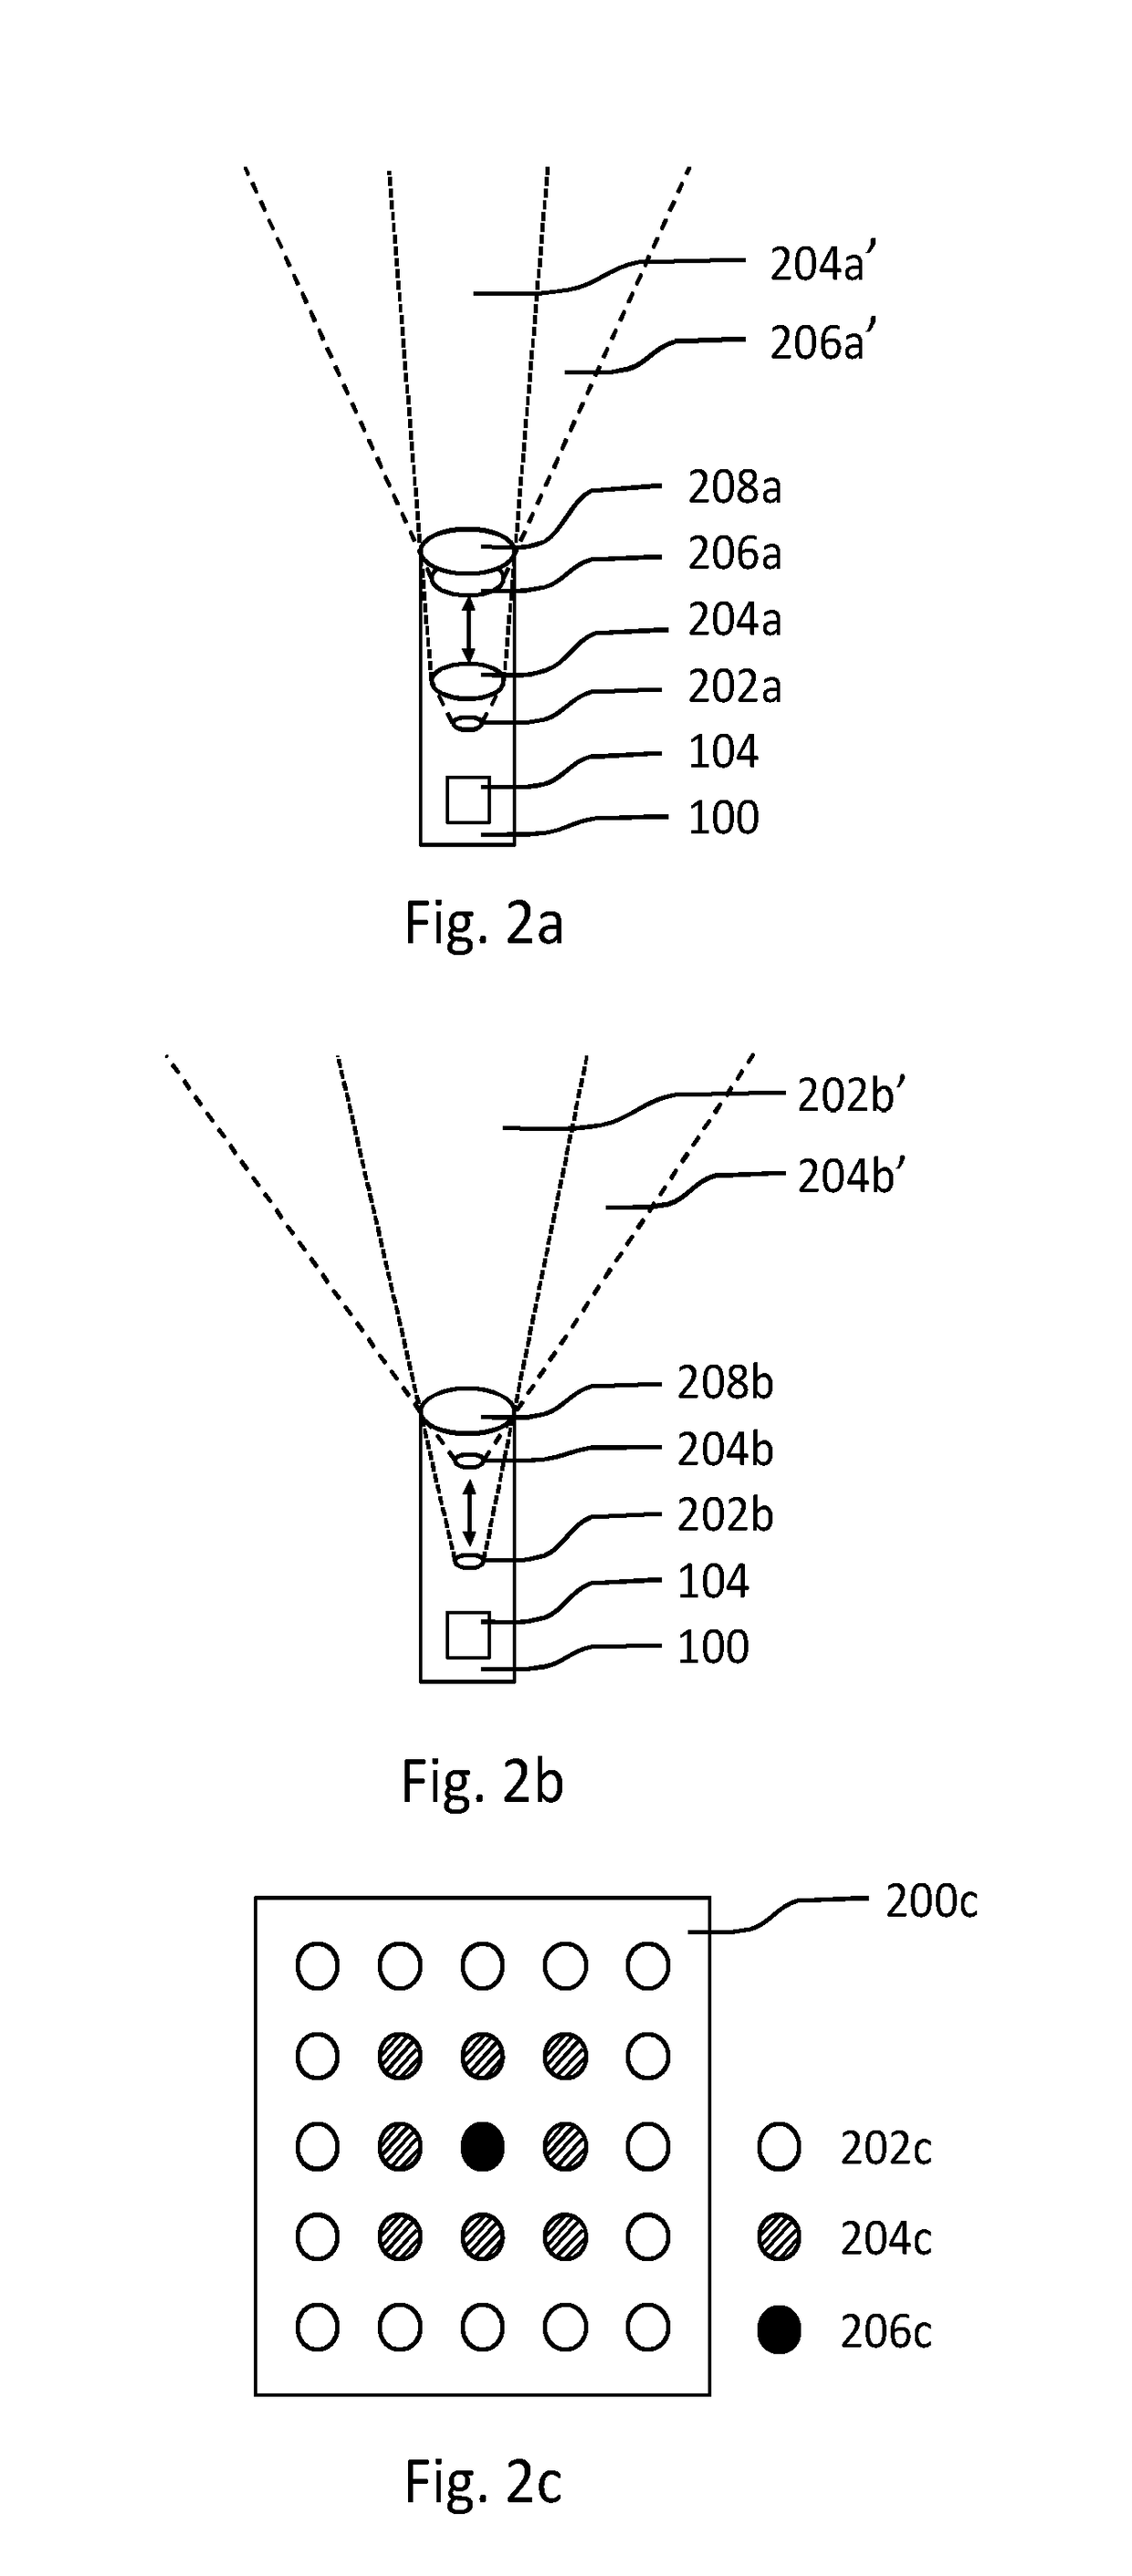 Light emitting device for generating light with embedded information